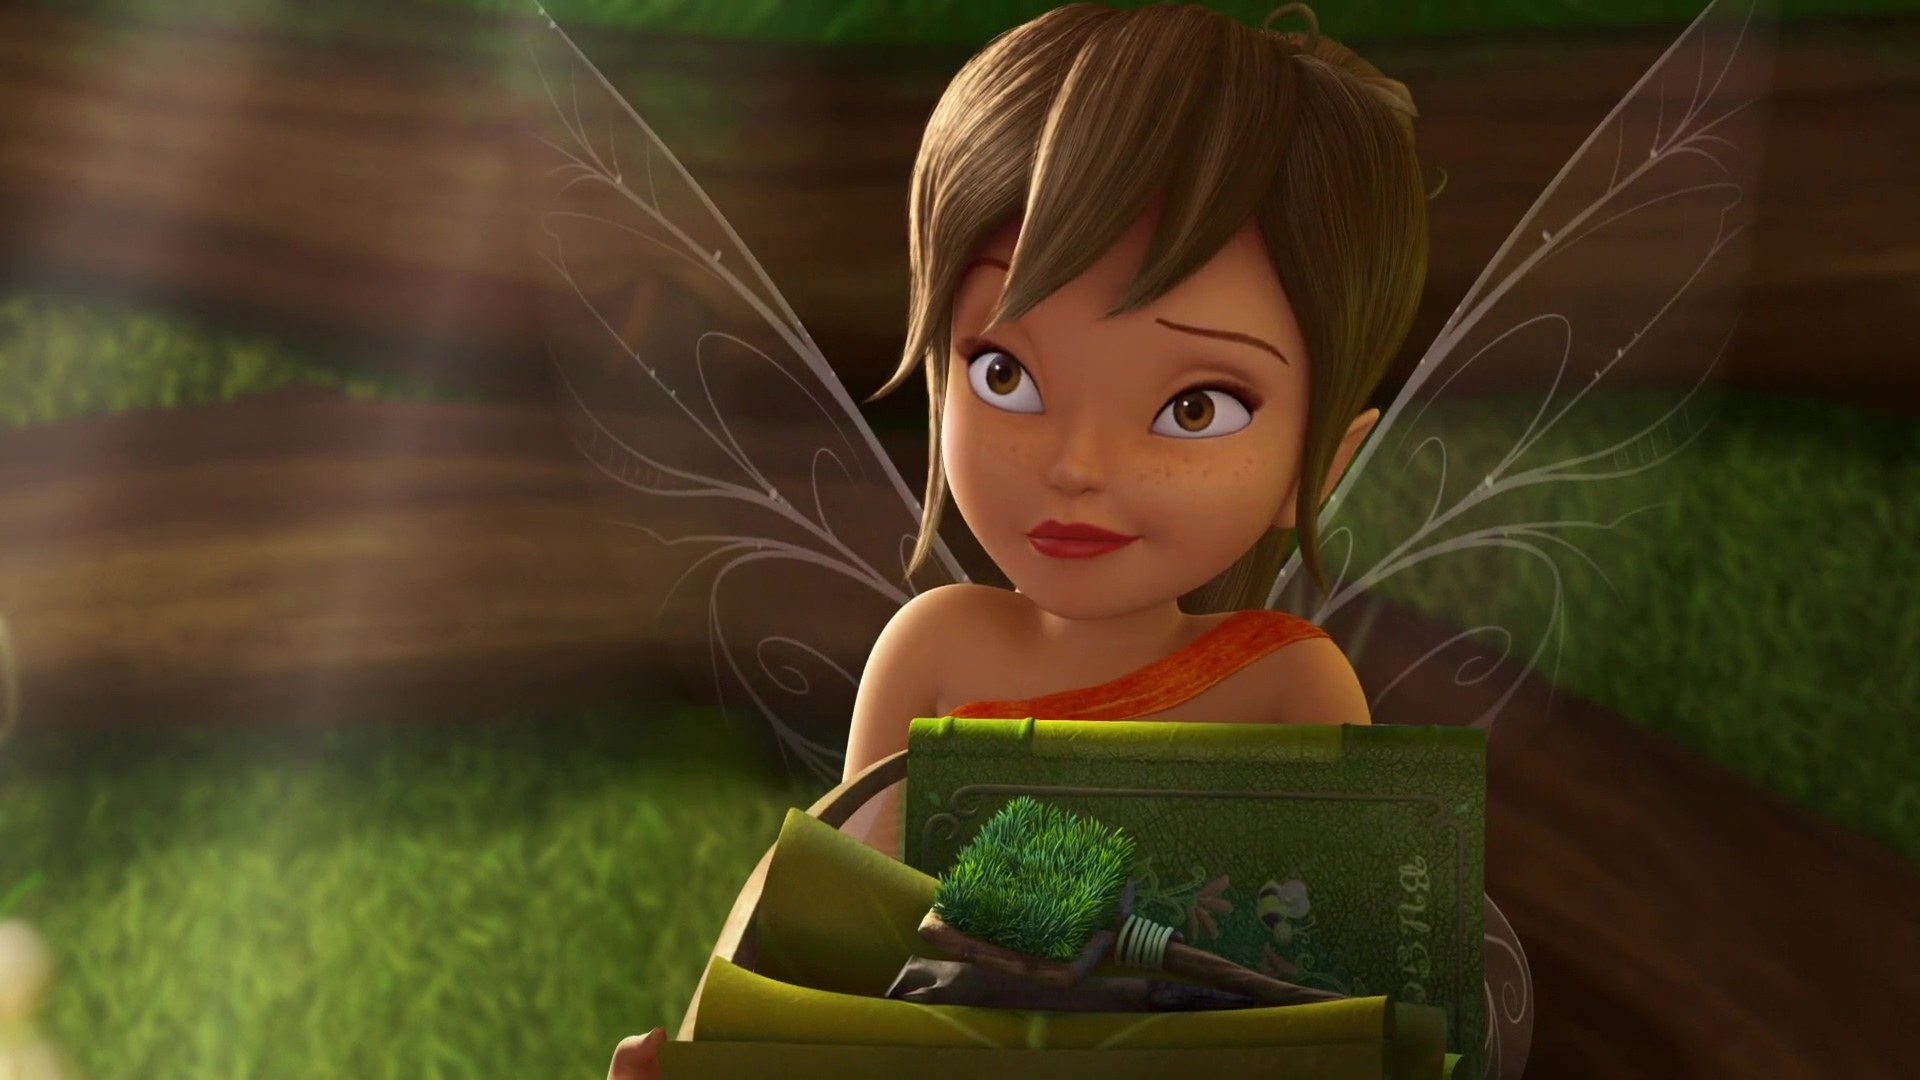 General 1920x1080 Tinkerbell animated movies movies